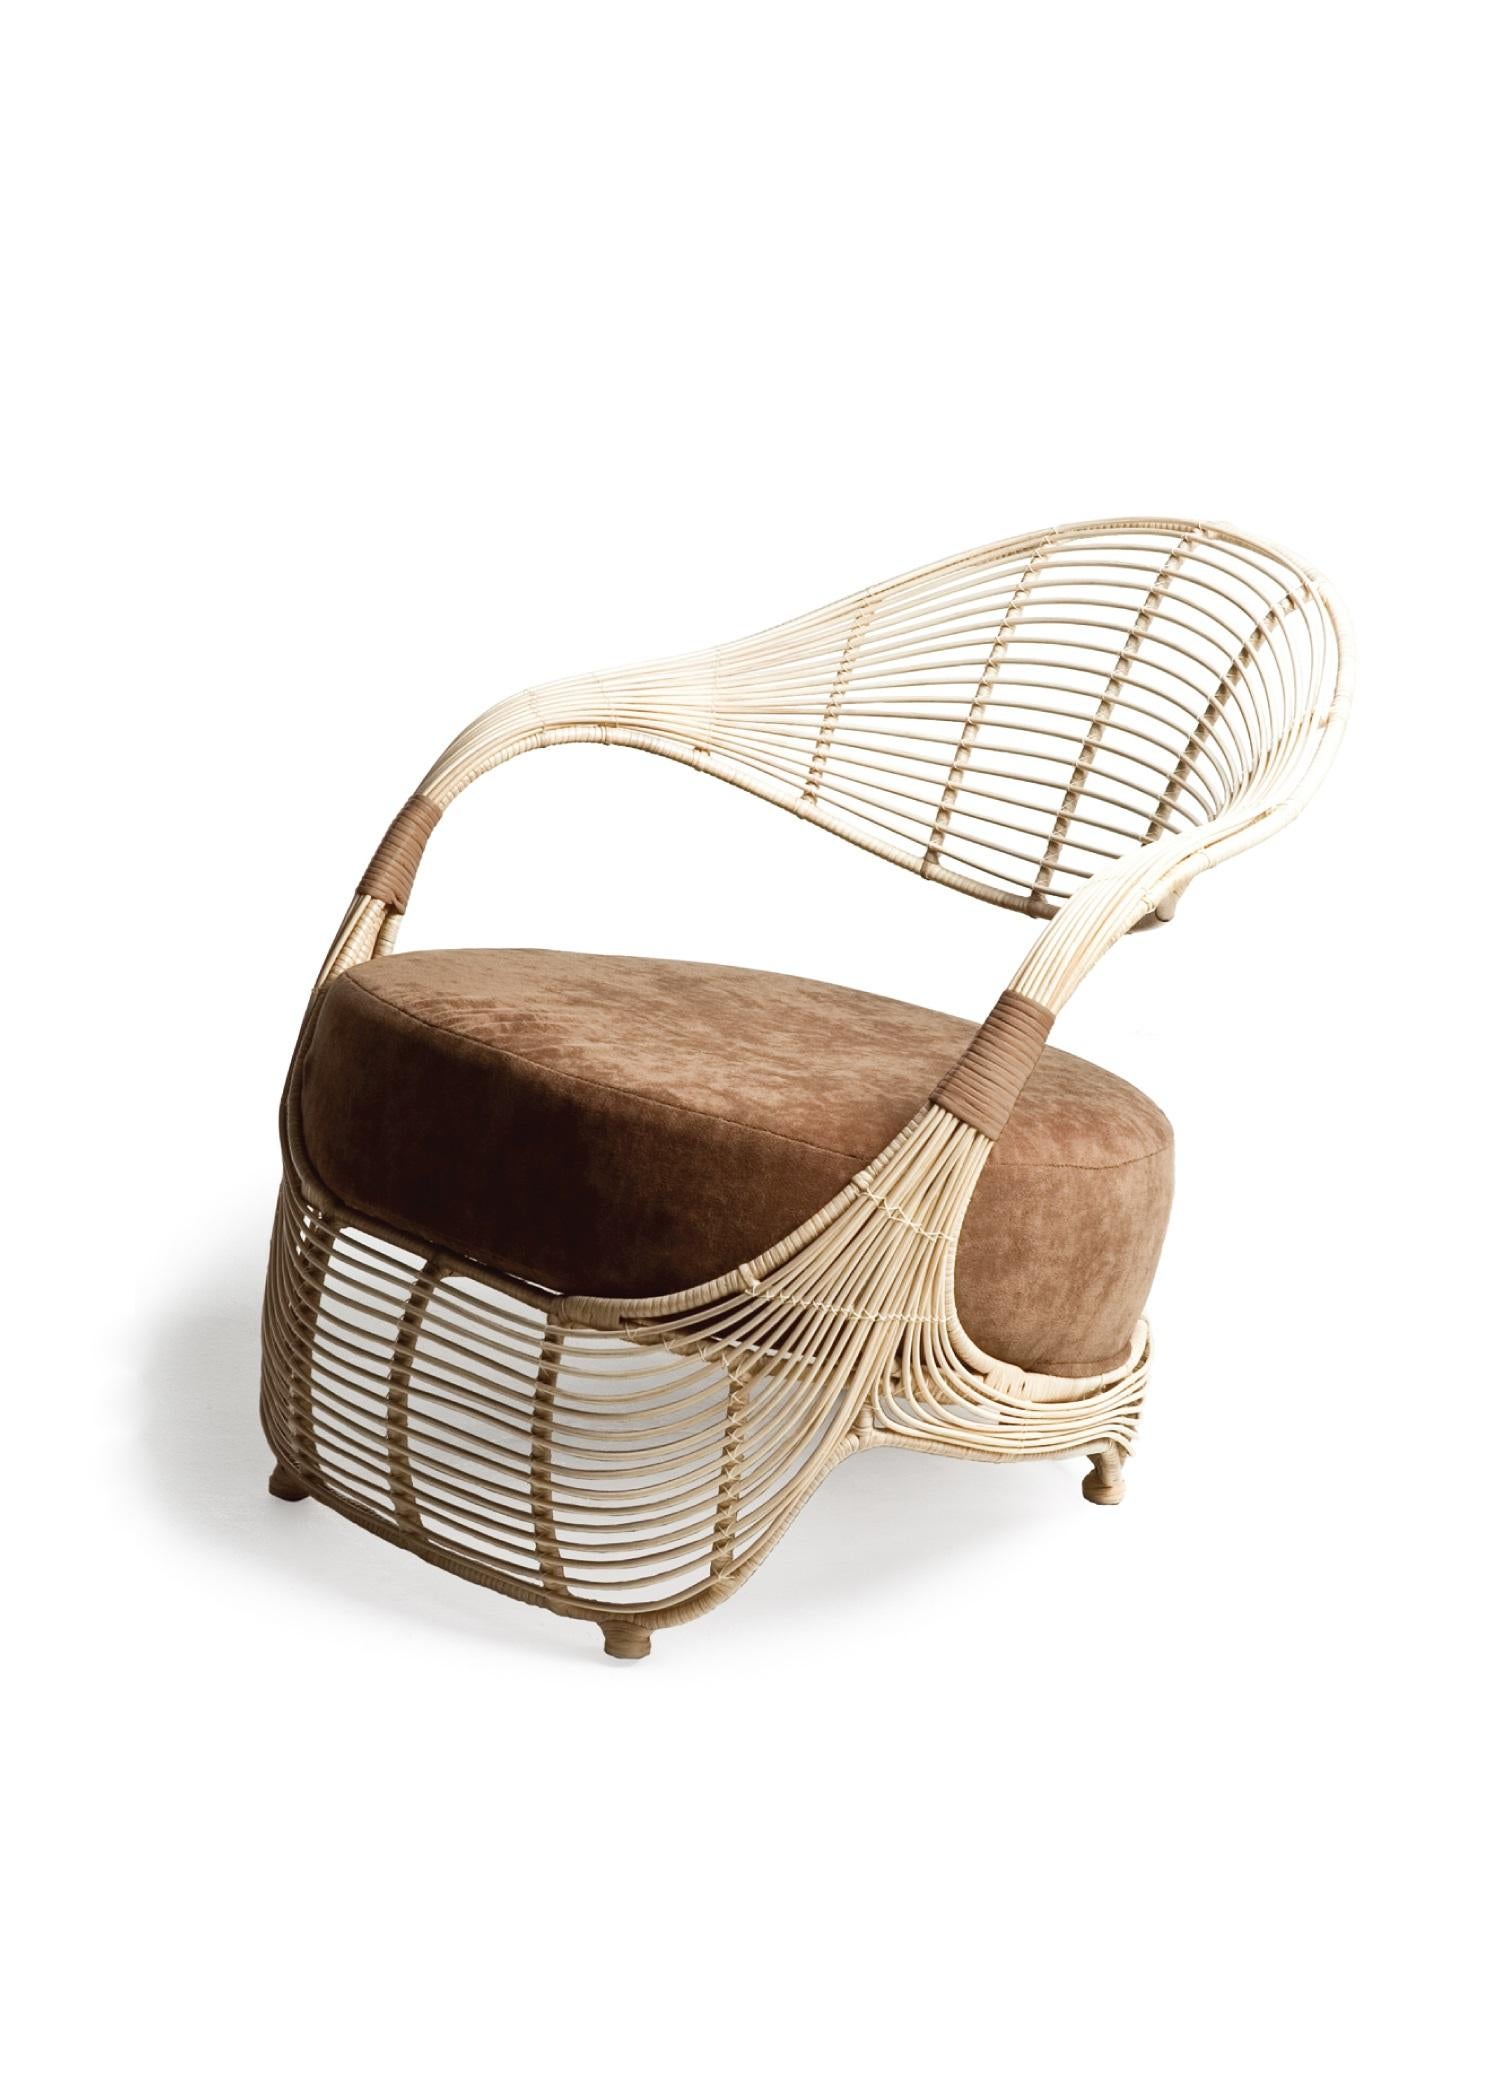 Indoor manolo easy Armchair by Kenneth Cobonpue
Materials: Rattan, nylon, steel. 
Also available in other colors and for outdoors.
Dimensions: 80.5 cm x 70.5 cm x H 73 cm

Taking inspiration from the curves of a woman’s sandal, Manolo’s playful